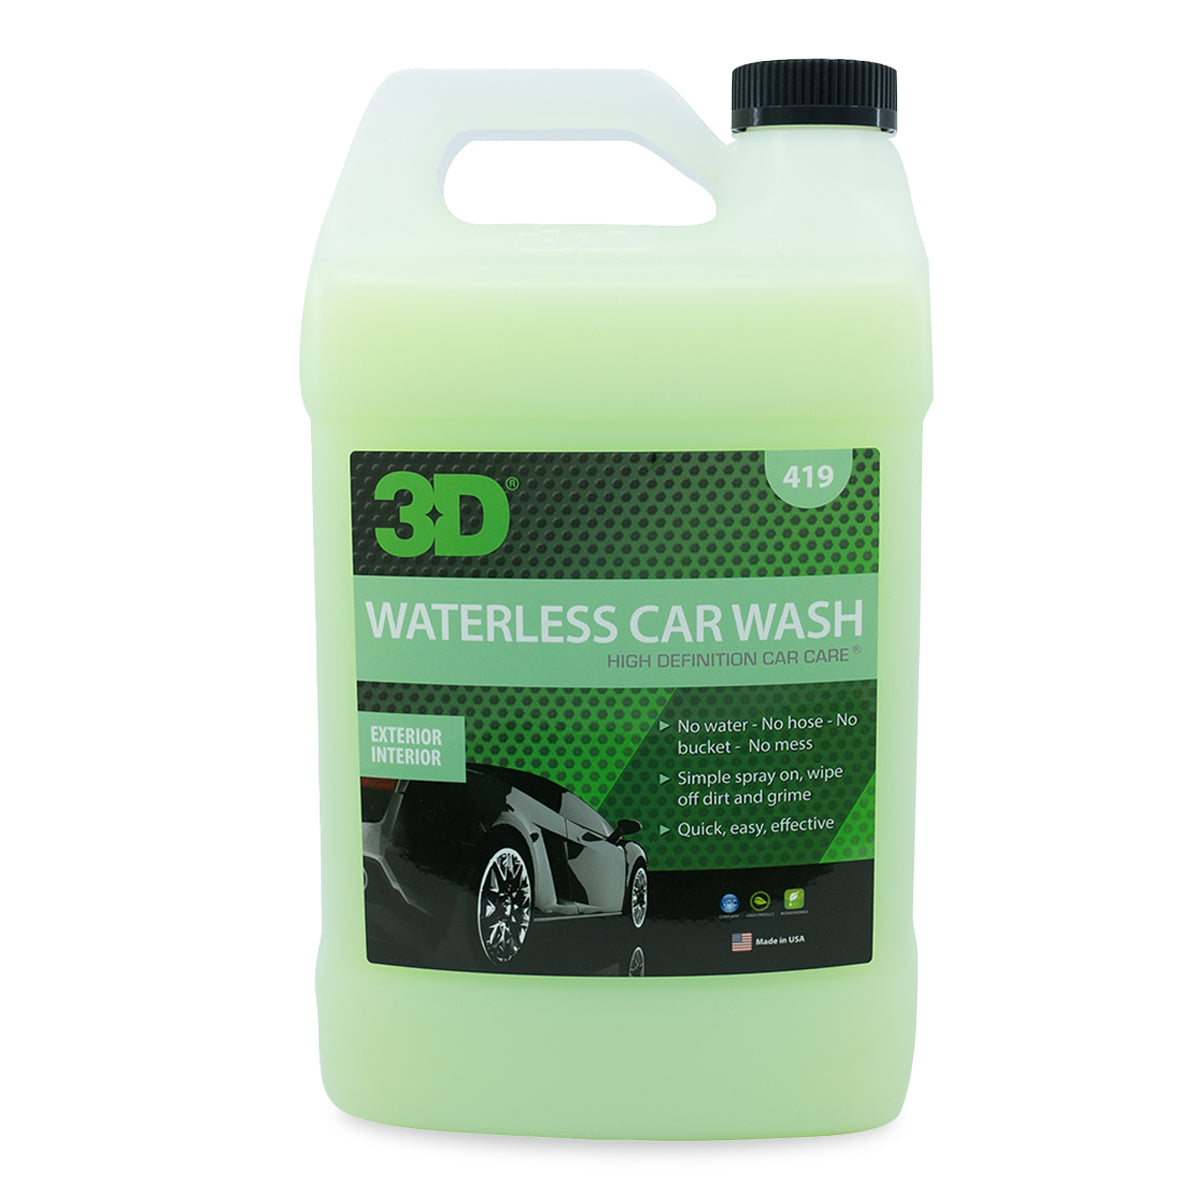 H&A QUALITY Professional Car Wash - Waterless Auto Cleaning Spray Solution  - Removes Vehicle Dirt, Grime, Mud - Cleans & Polishes Exterior Surfaces 